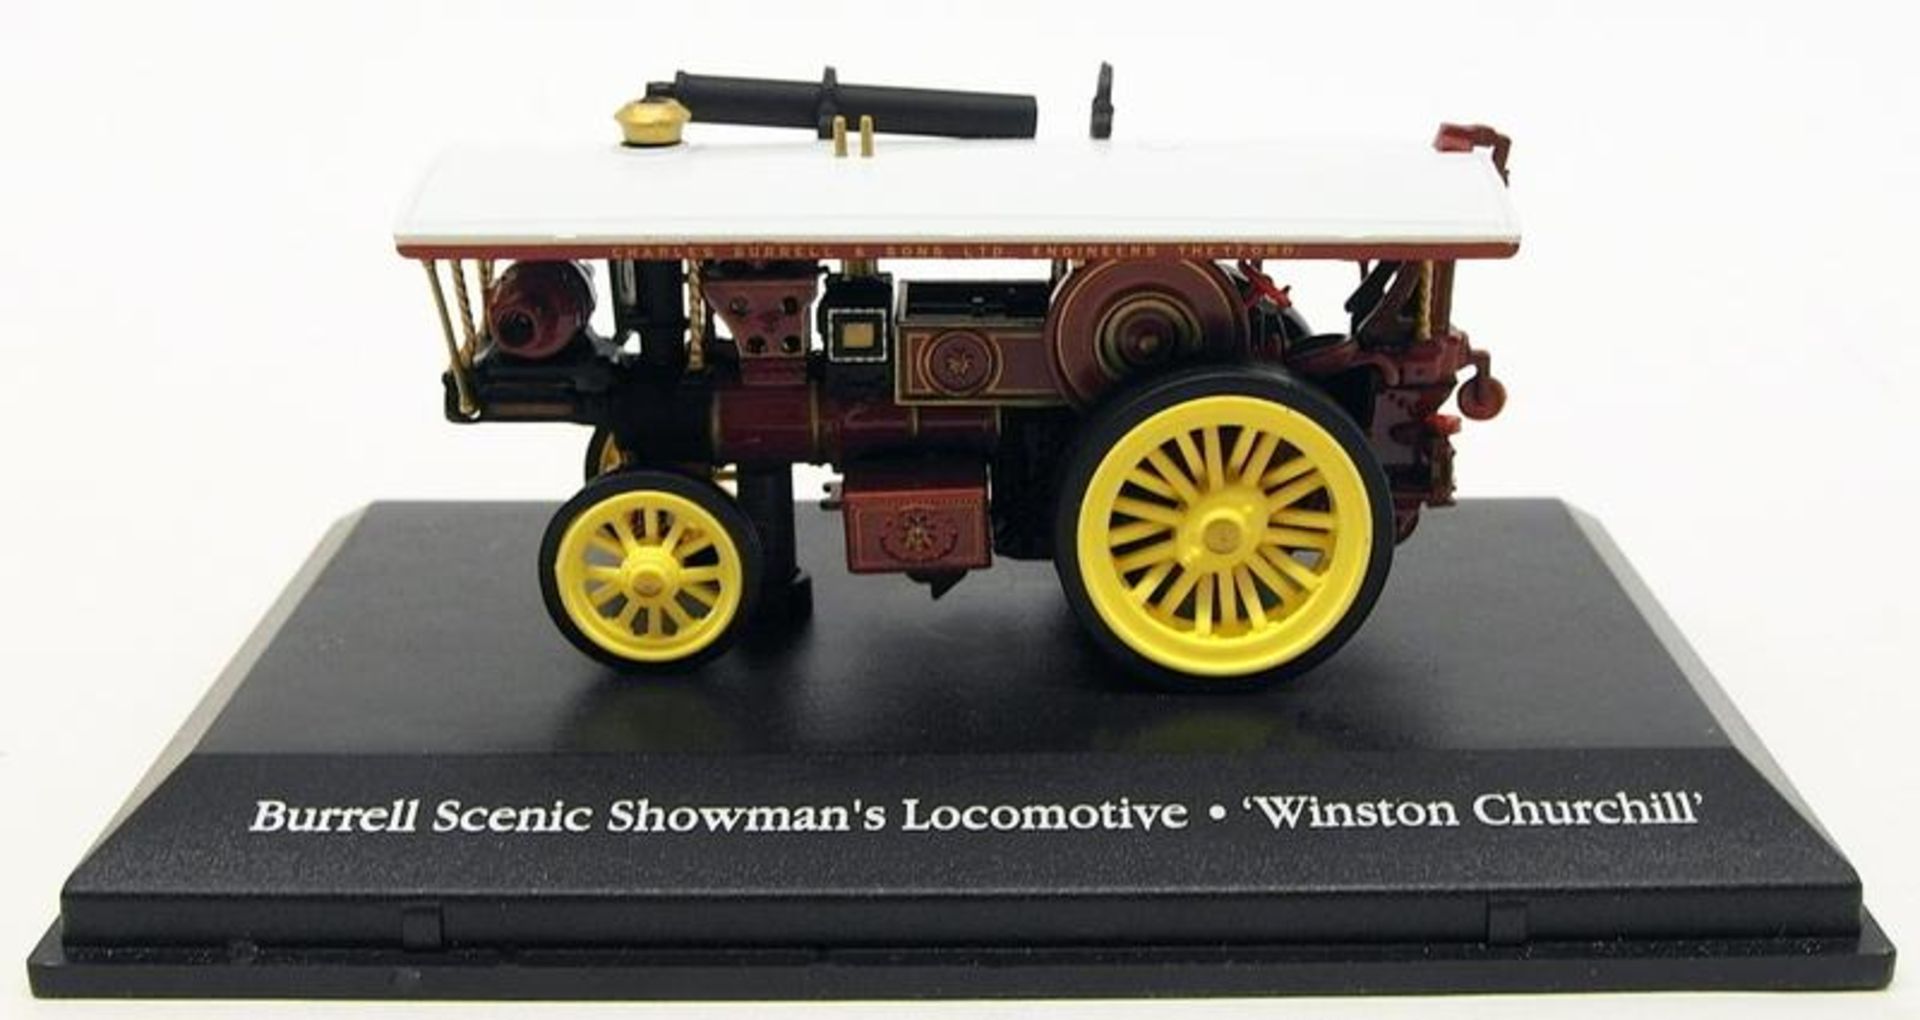 V Brand New Collectors Edition Die-Cast Burrell Scenic Locomotive "Winston Churchill" - Mounted On